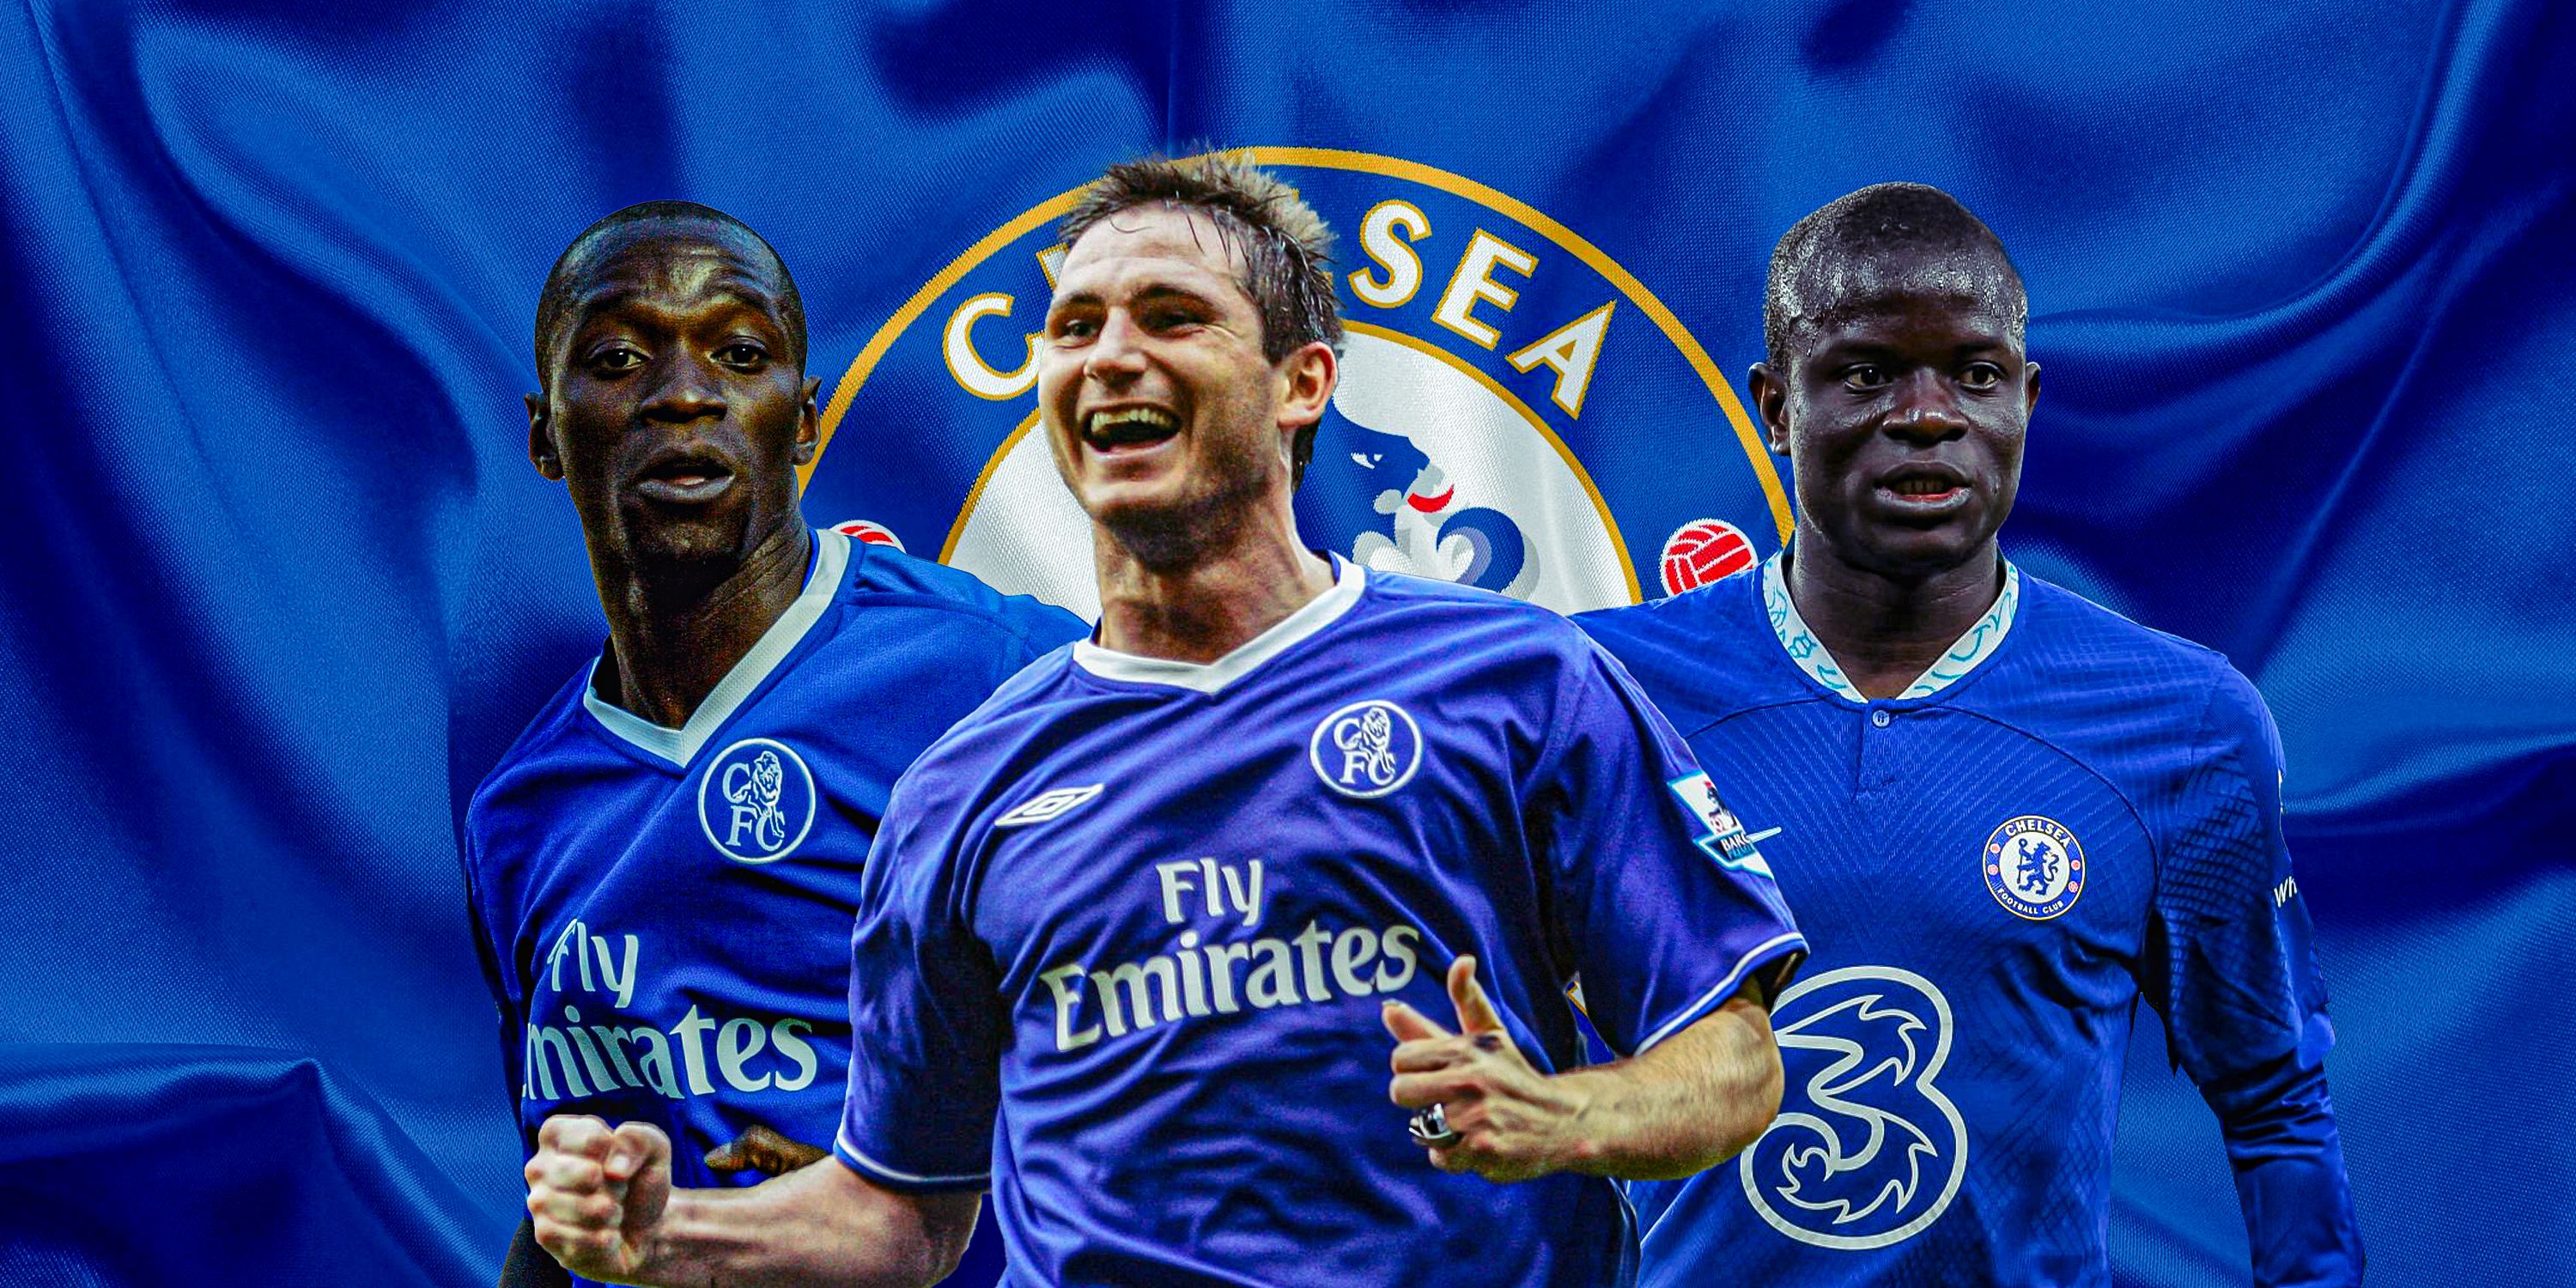 A custom image of Claude Makelele, Frank Lampard and N'Golo Kante